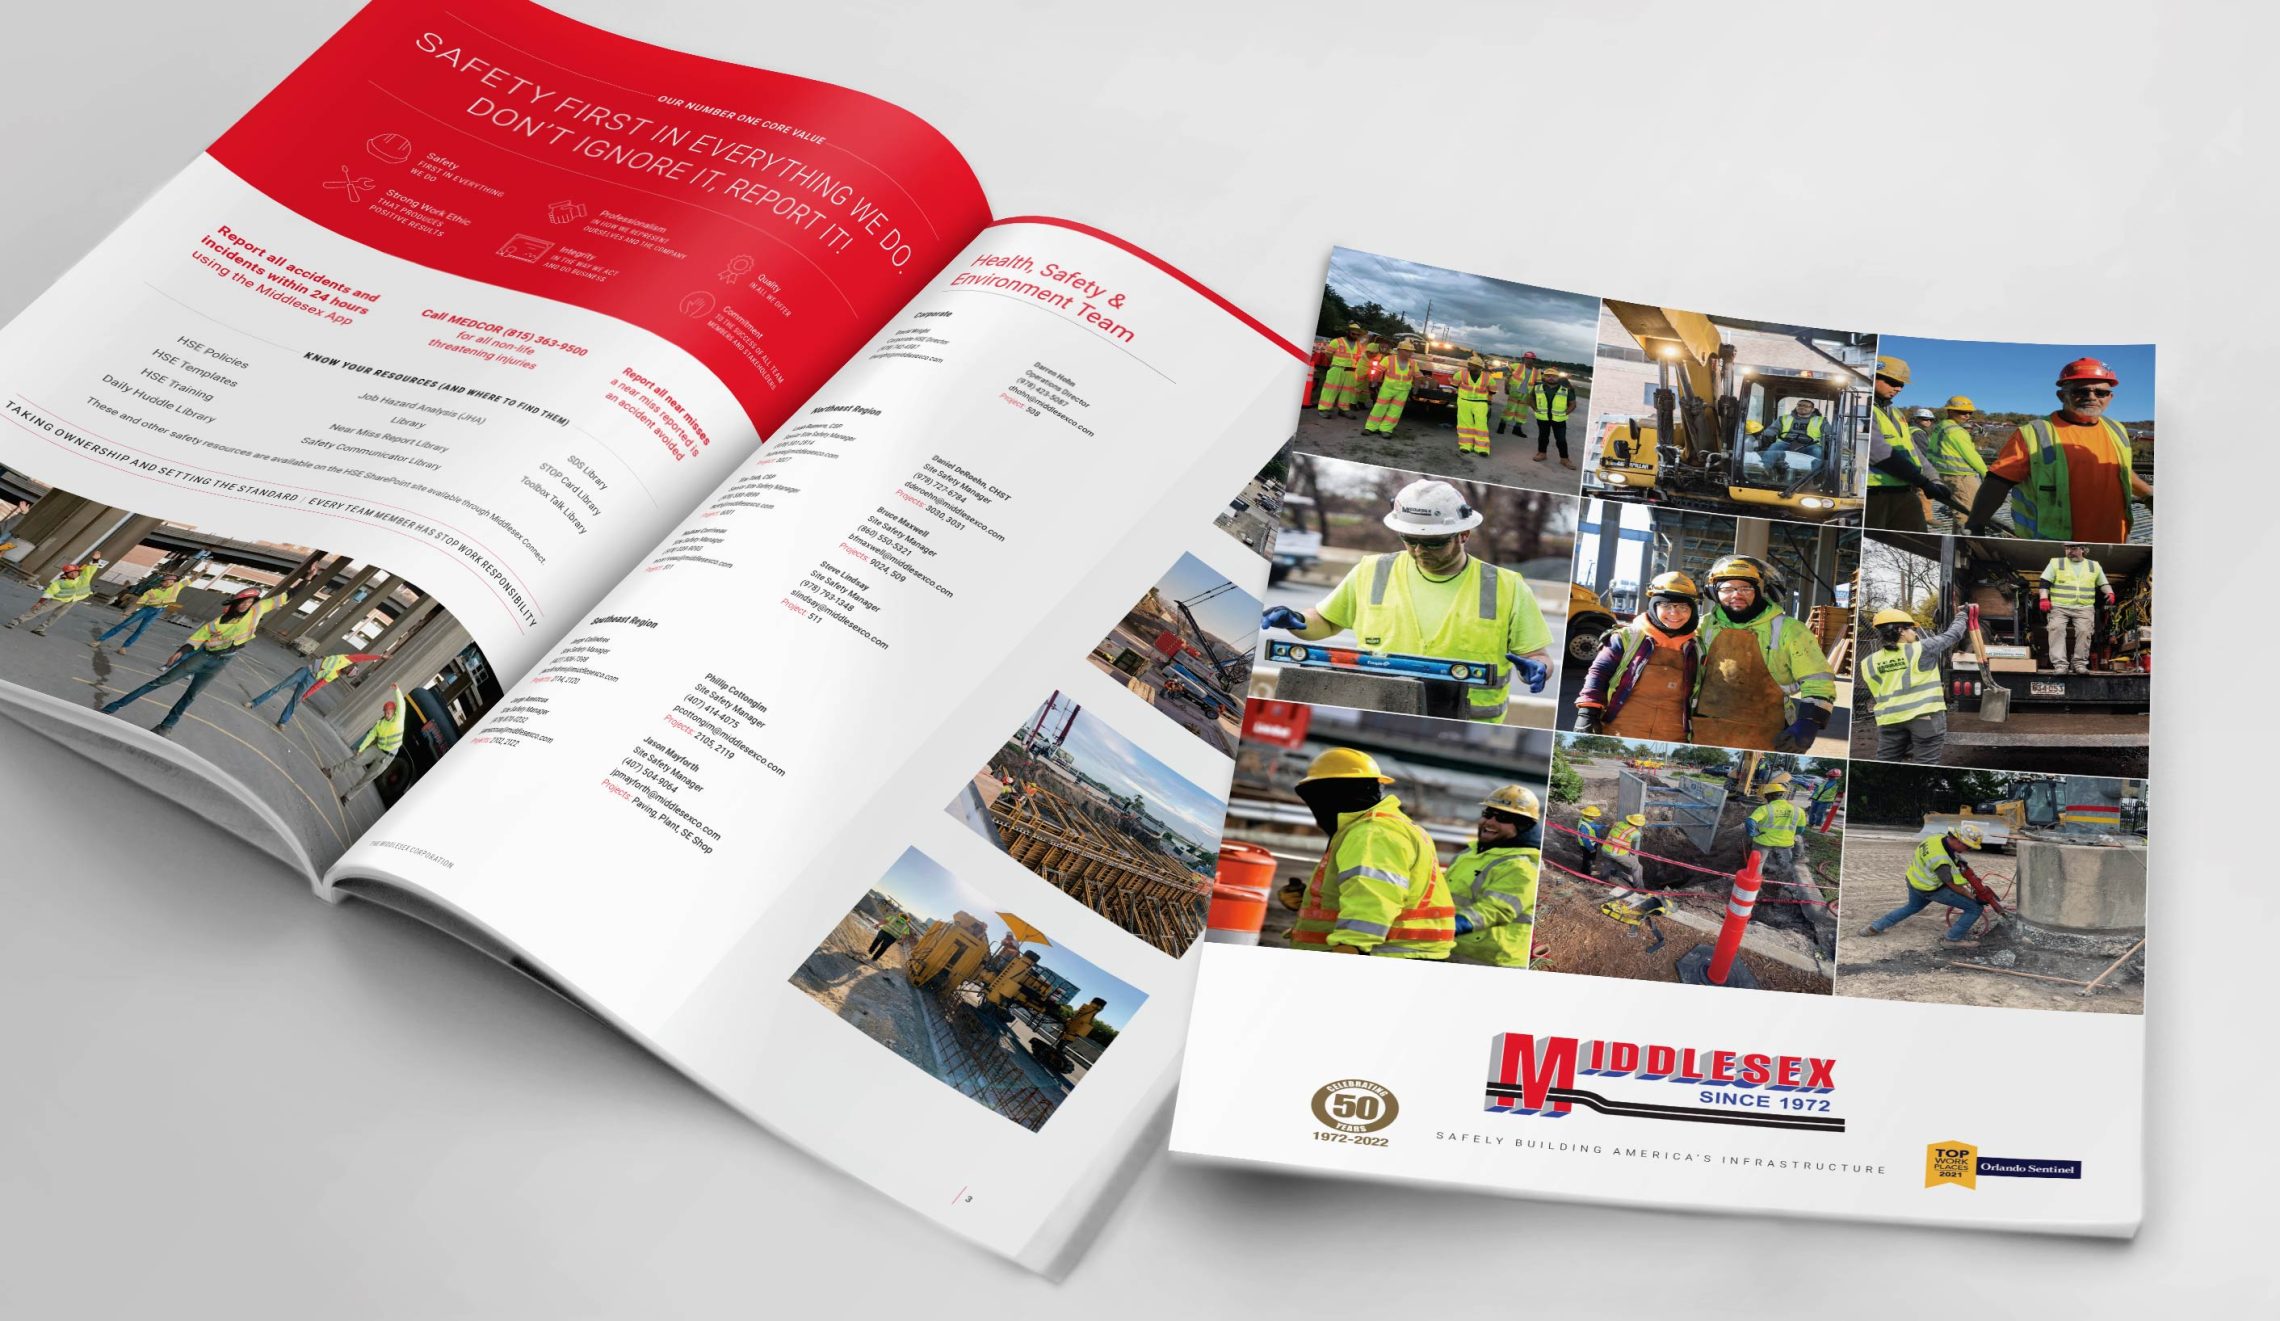 Middlesex corporate brochure cover and interior spread